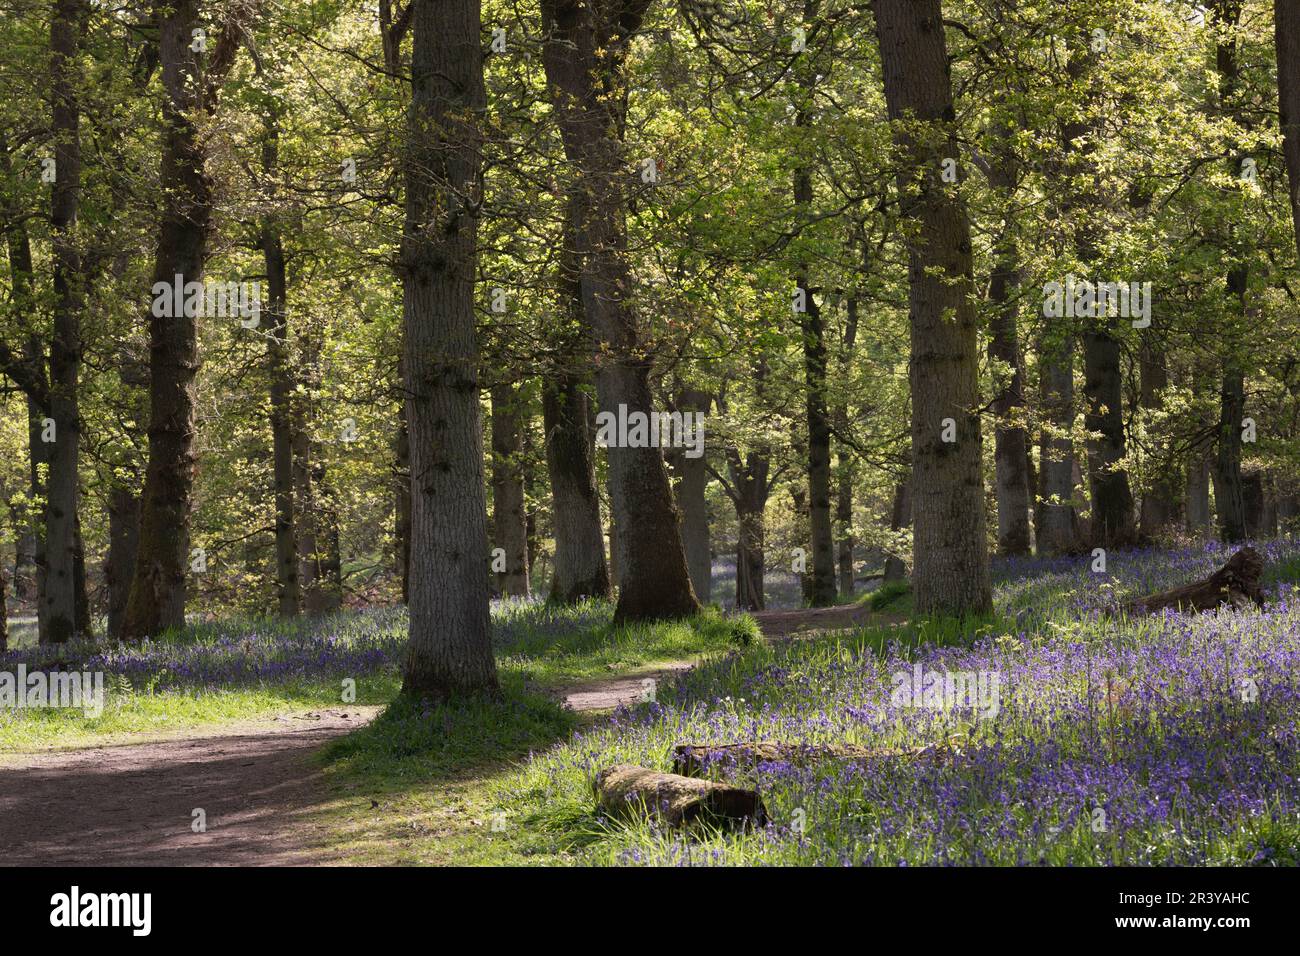 A Sunlit Footpath Leading into Kinclaven Bluebell Wood, an Ancient Woodland in Scotland, with Bluebells in Flower Beneath the Oak Trees Stock Photo